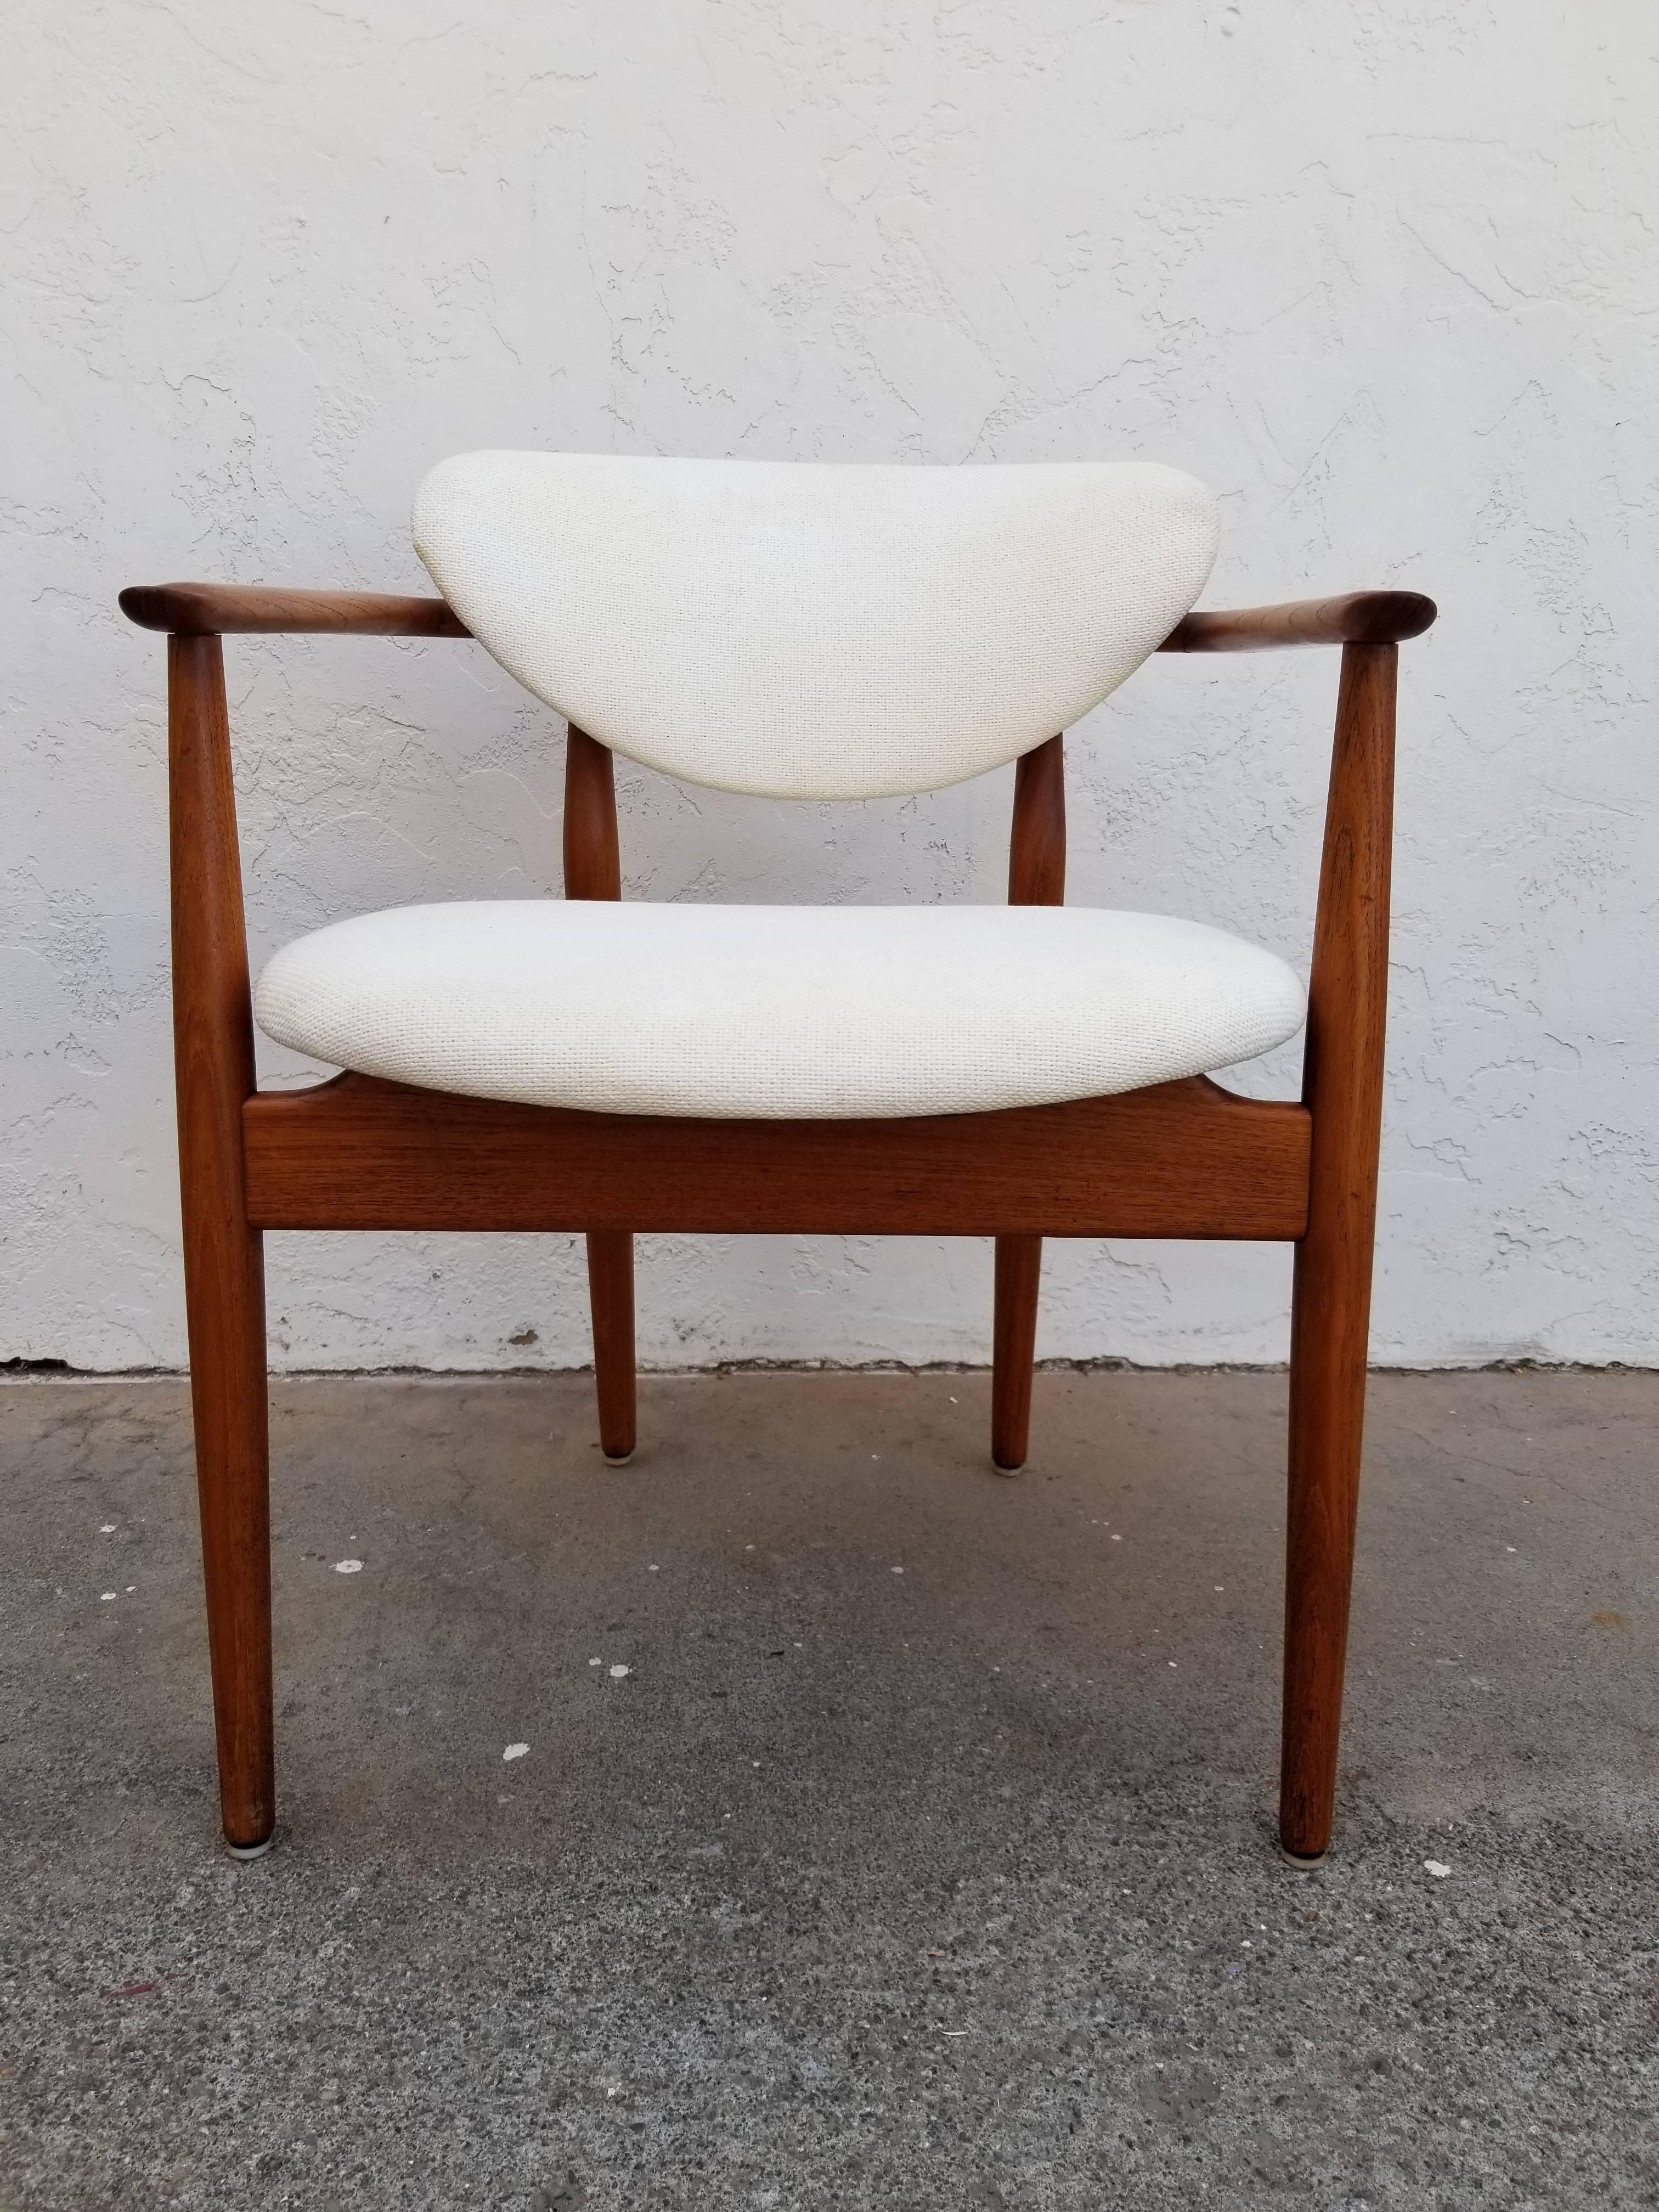 Four teak dining chairs attributed to Finn Juhl. One armchair and three side chairs. Similar to models Nv 55 and 108

Vintage fabric has been professionally cleaned, chairs frames professionally cleaned and polished. Chairs have older, minor